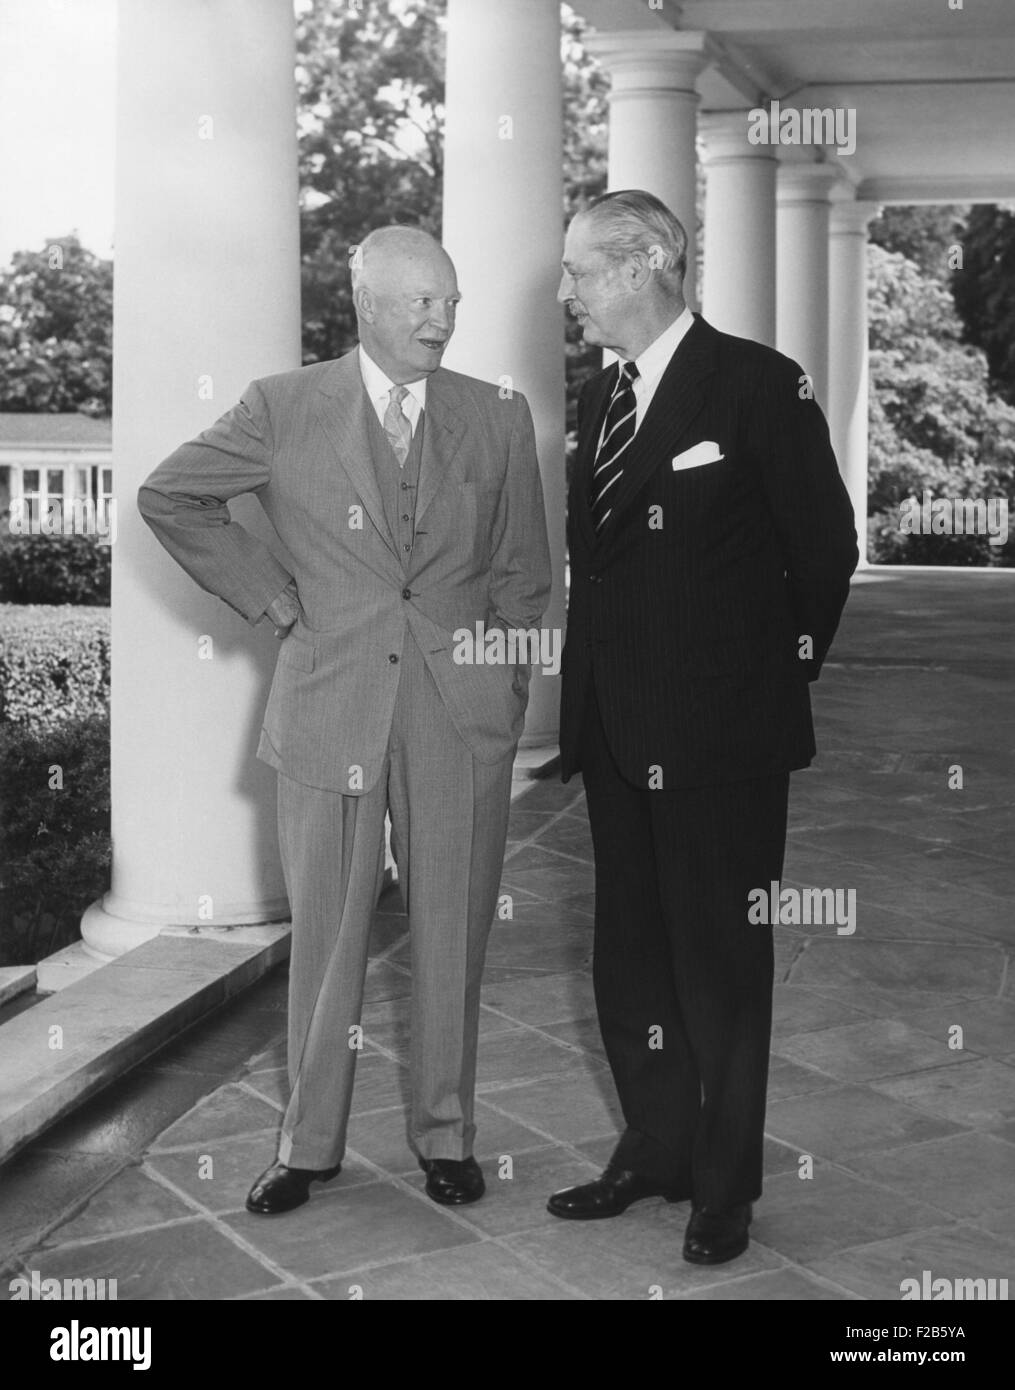 President Eisenhower with British Prime Minister Harold Macmillan on the West Wing Portico. June 9, 1958. - (BSLOC 2014 16 222) Stock Photo